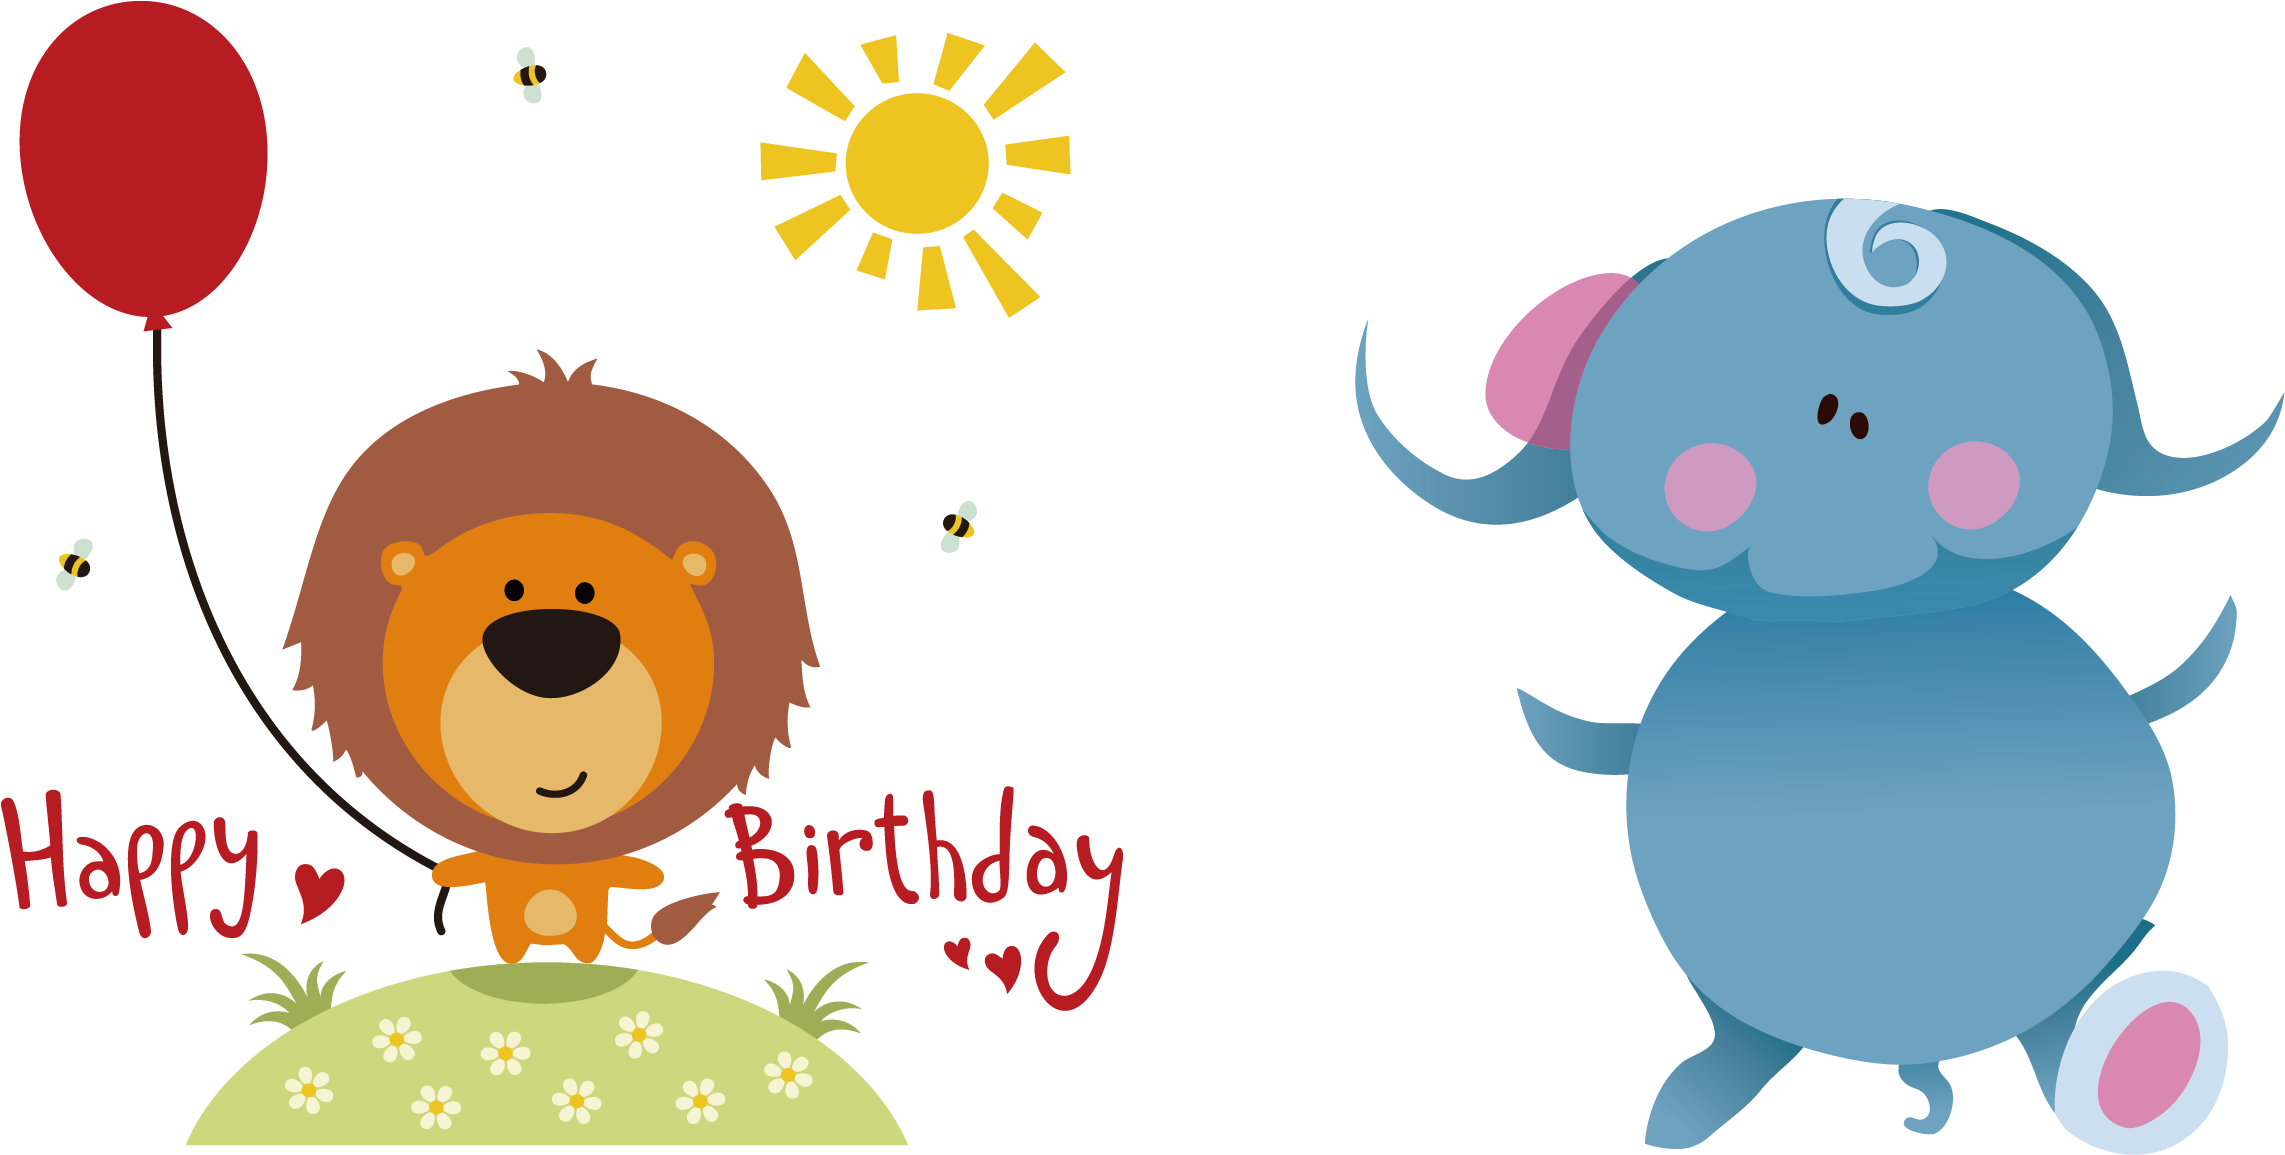 Happy Birthday To You Greeting Card Clip Art - Happy Birthday To You Greeting Card Clip Art (2417x1234)